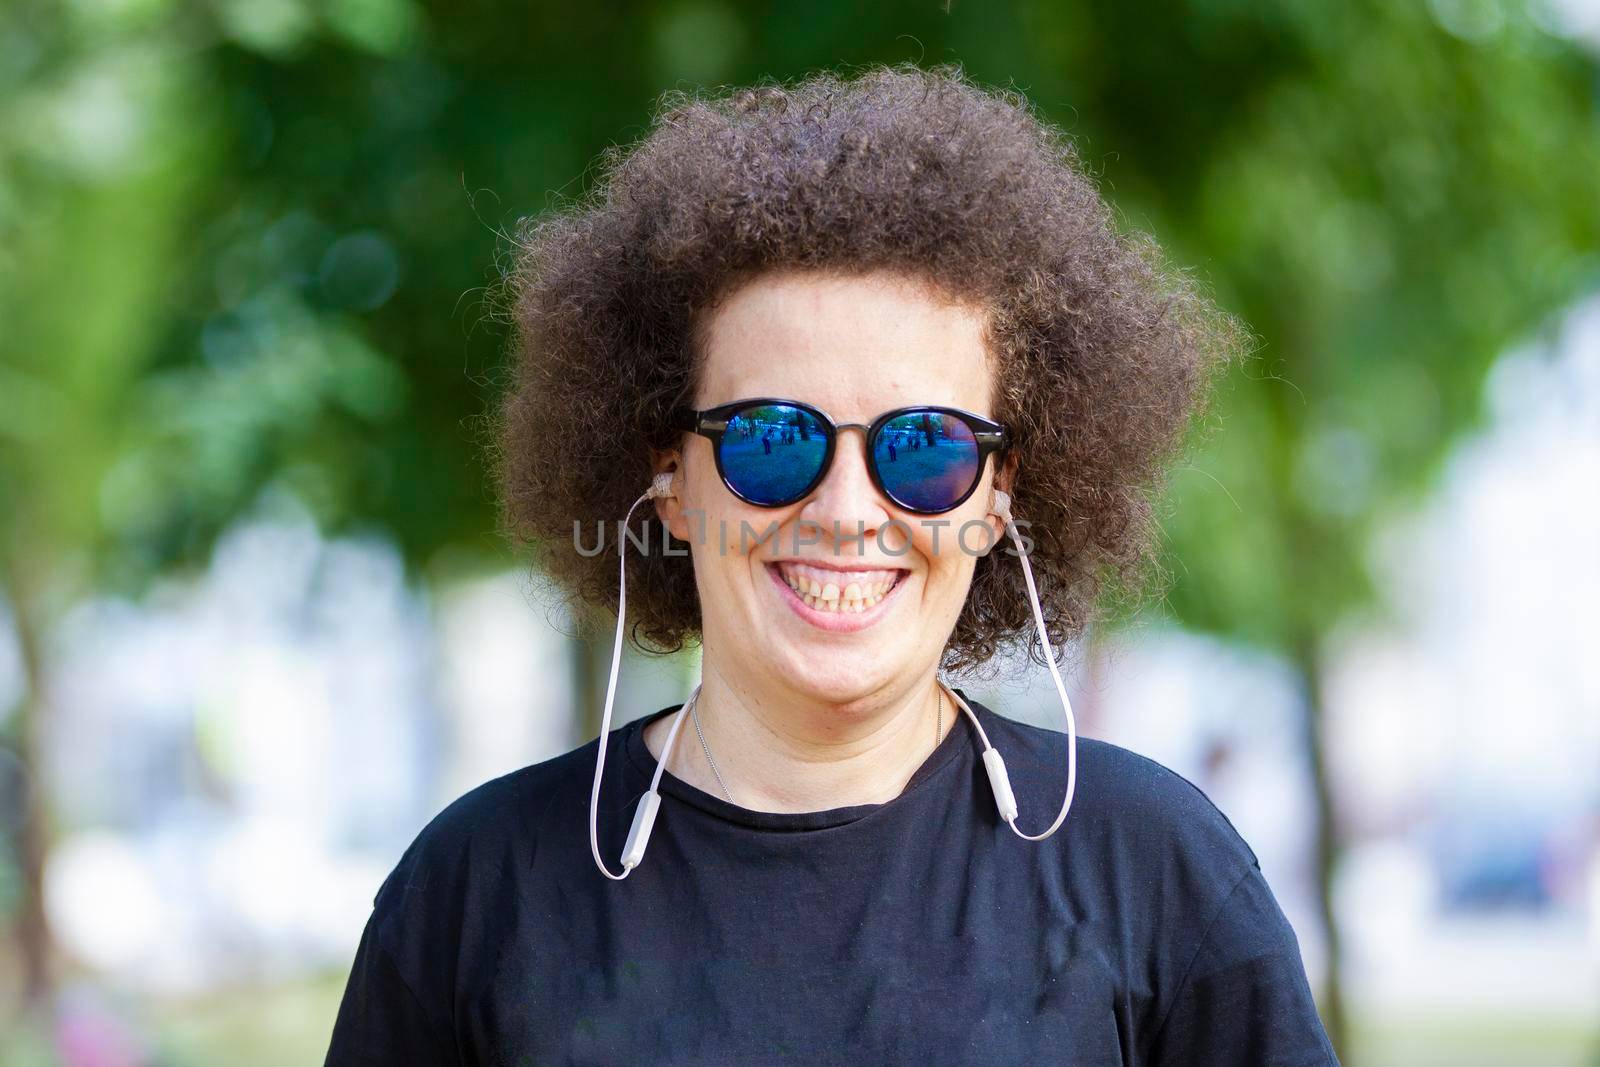 Curly girl in sunglasses looks at the camera by Sviatlana